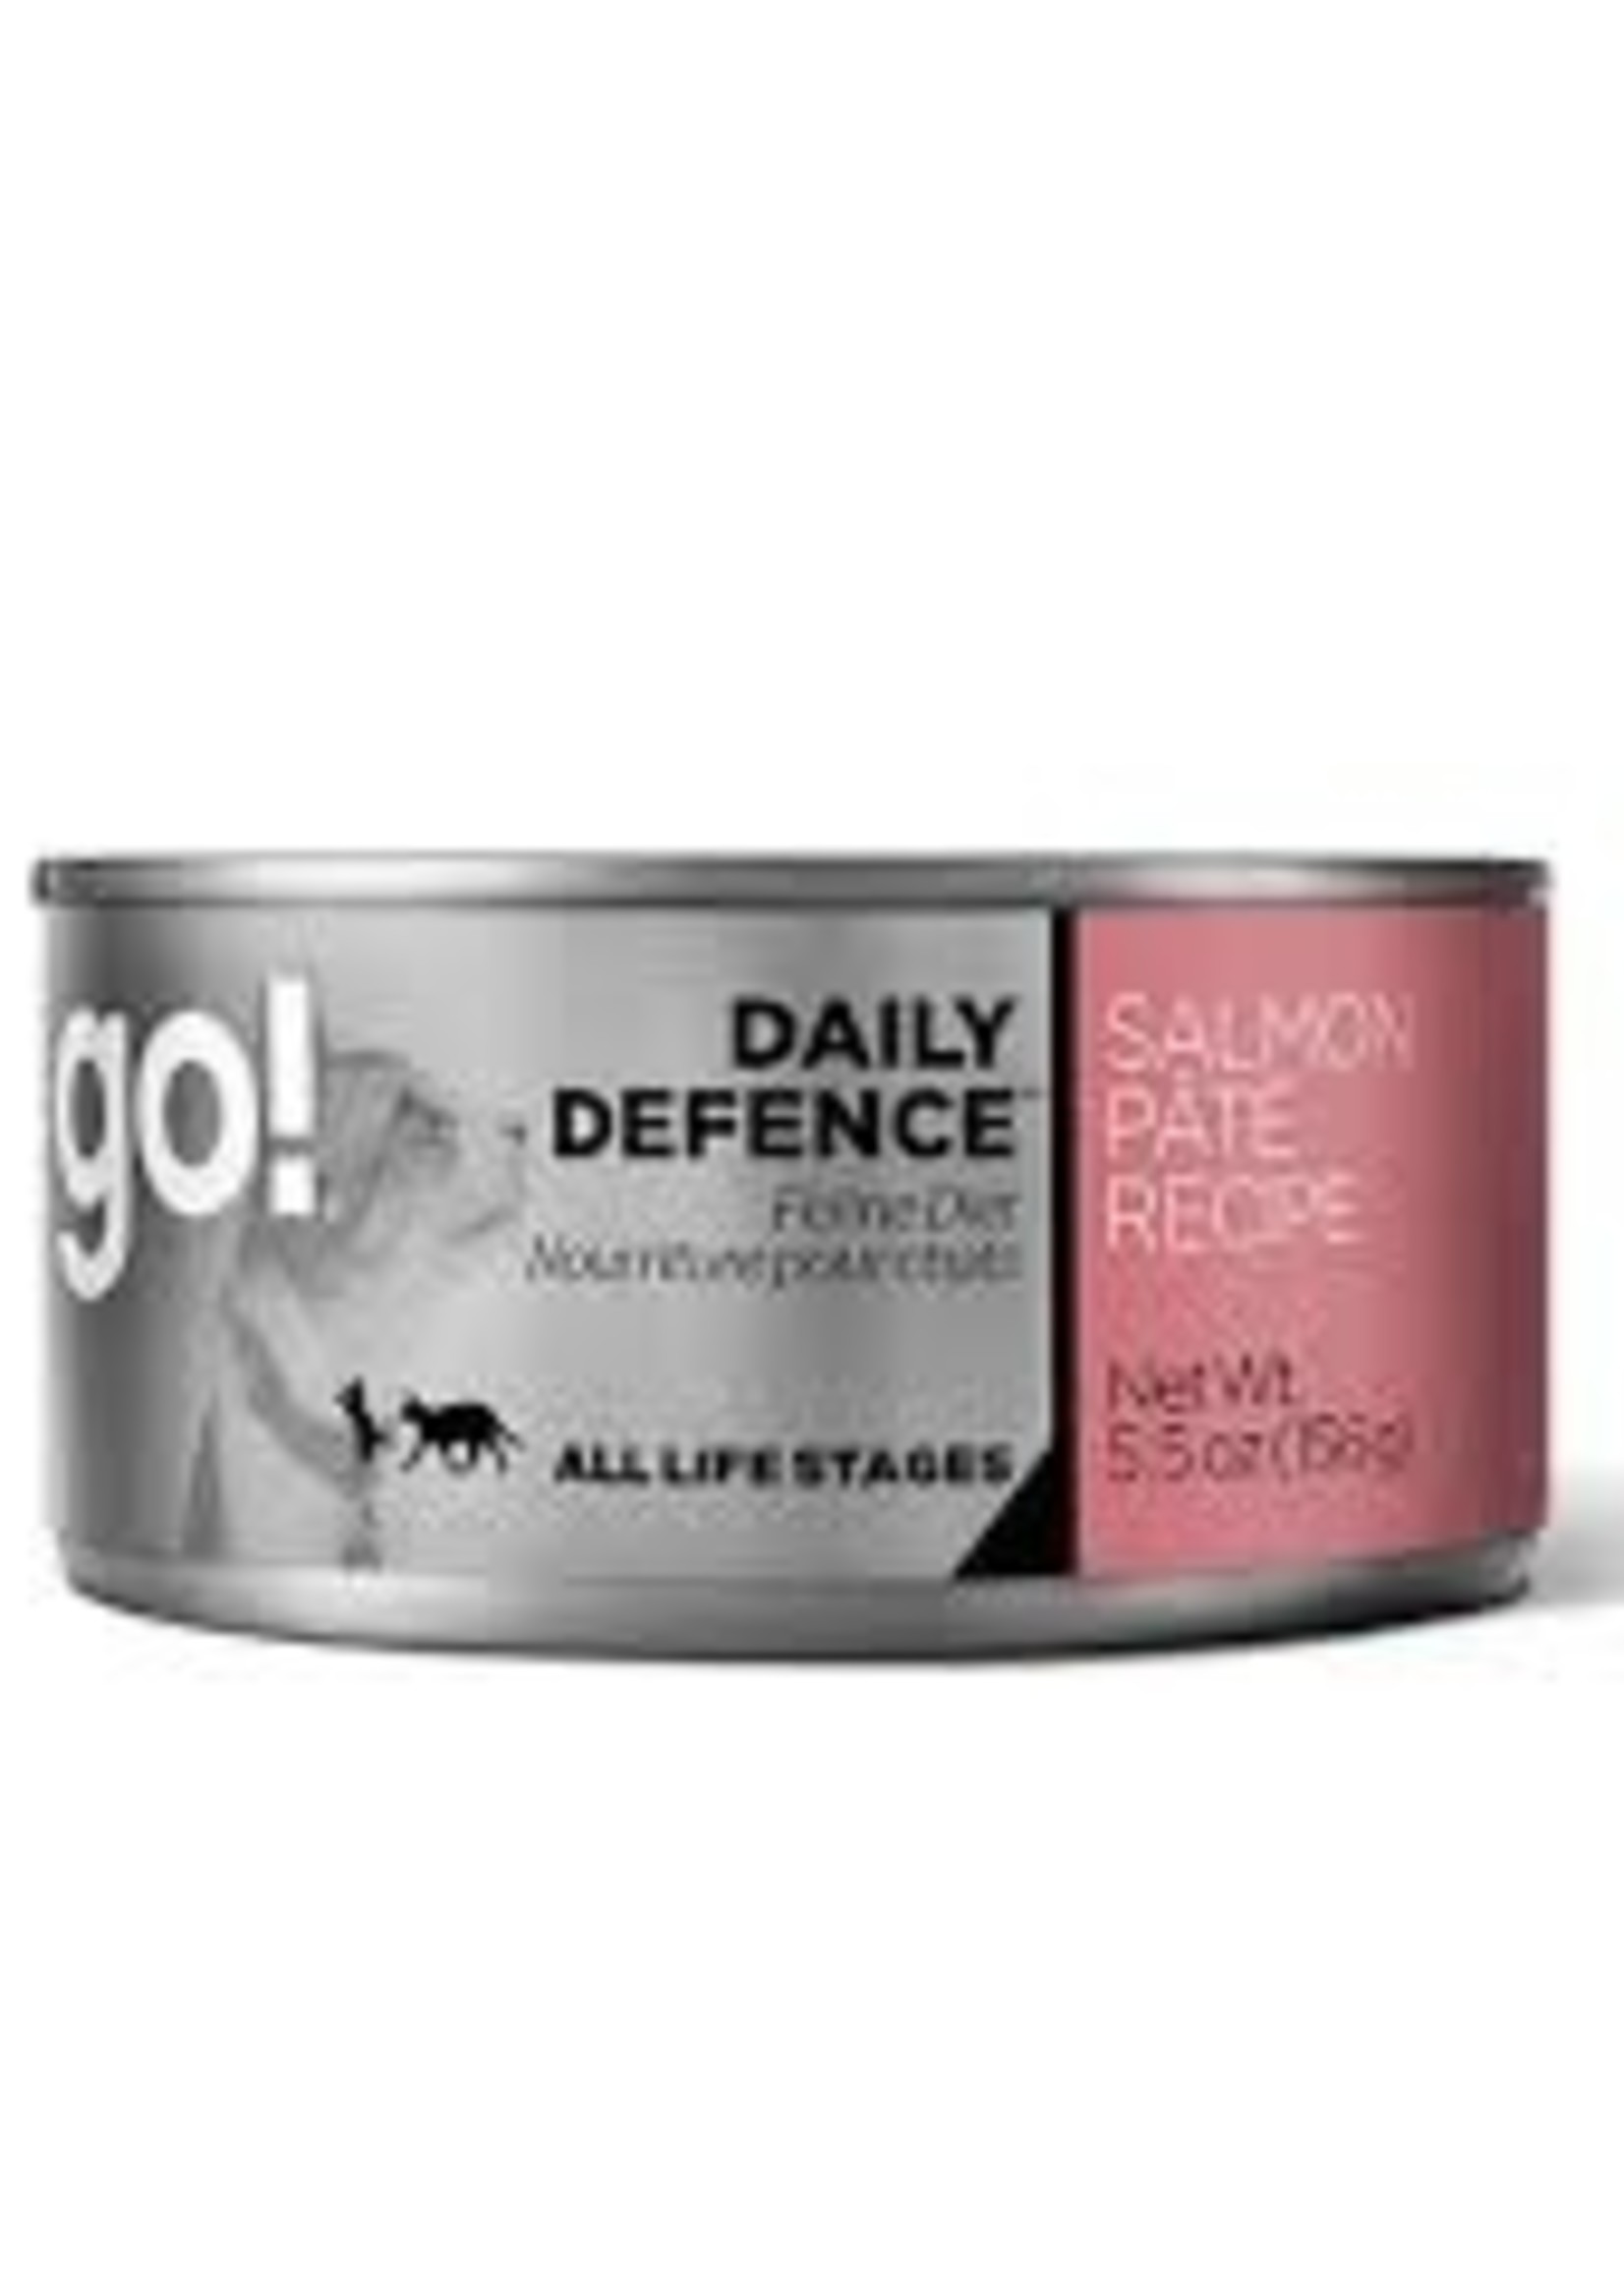 Petcurean Go Daily Defence Cat Salmon Pate Can 5.5oz